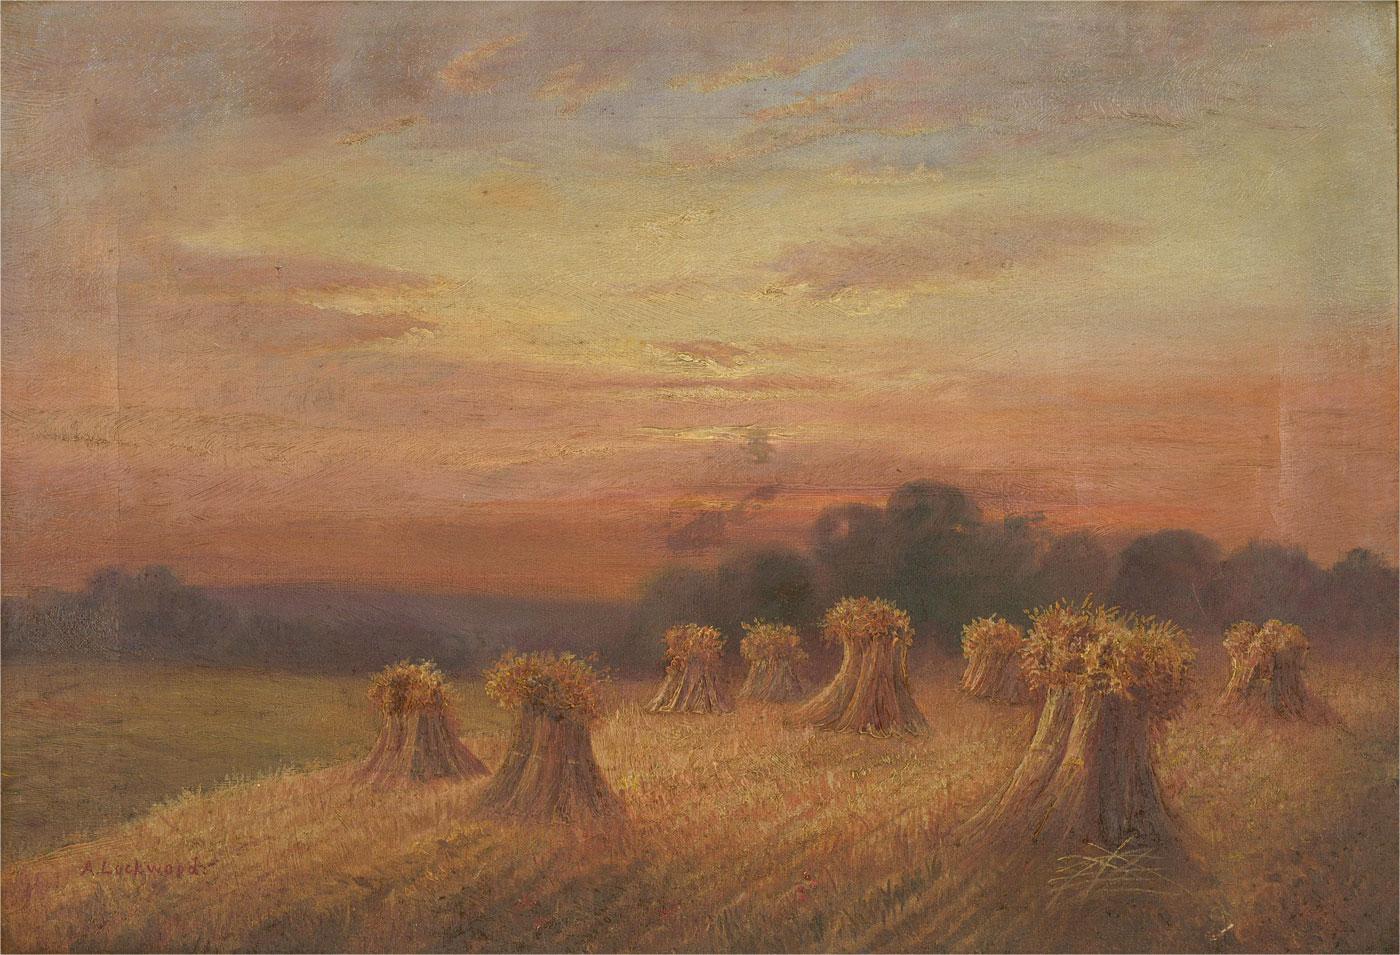 This charming landscape study depicts freshly harvested haystacks before a sunset. Painted in fine detail using a subtle impasto technique to create depth and texture. Signed to the lower left. Presented in a simple gilt frame. On canvas on